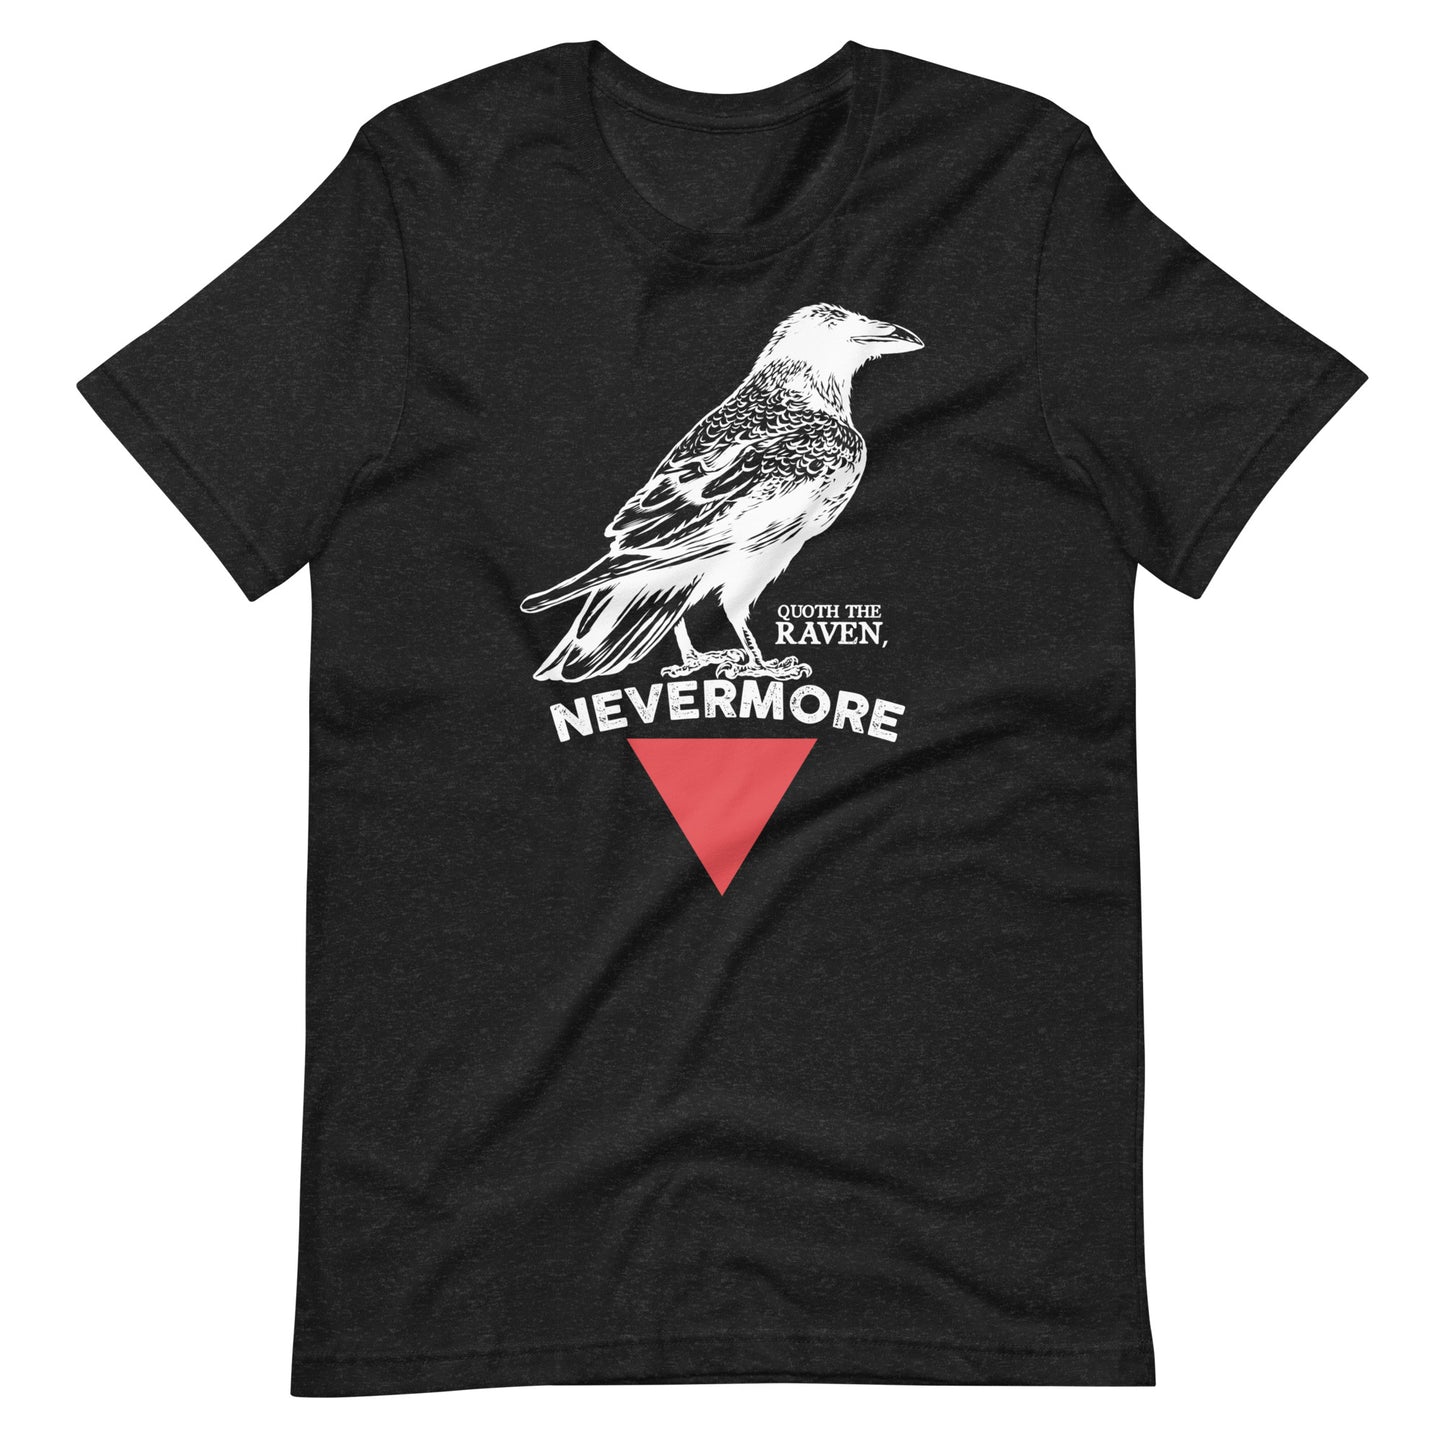 The Raven Nevermore Triangle - Men's t-shirt - Black Heather Front